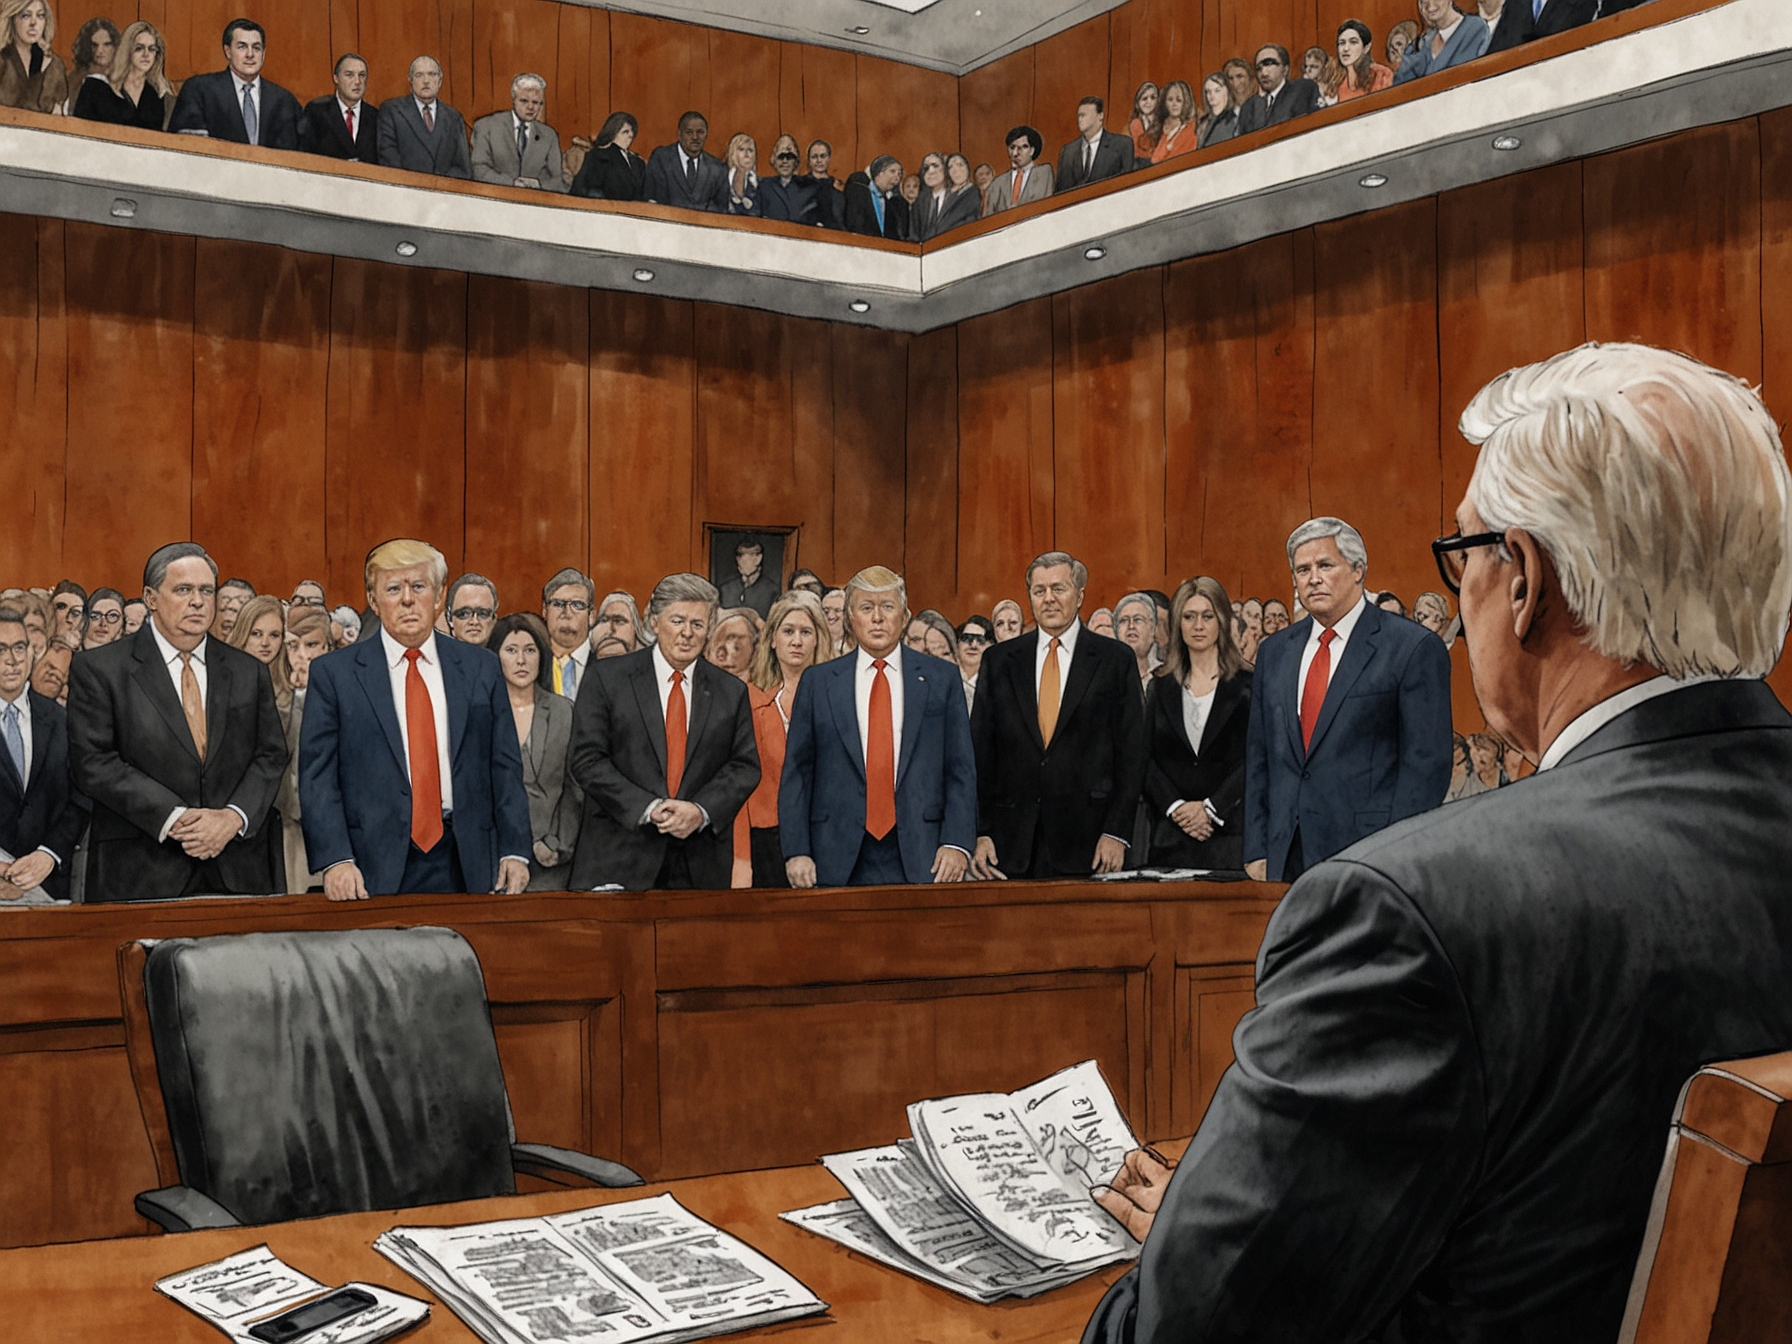 Observers and media capturing the high-profile three-day hearing in Florida, highlighting the intense public and media scrutiny surrounding the Trump legal proceedings.